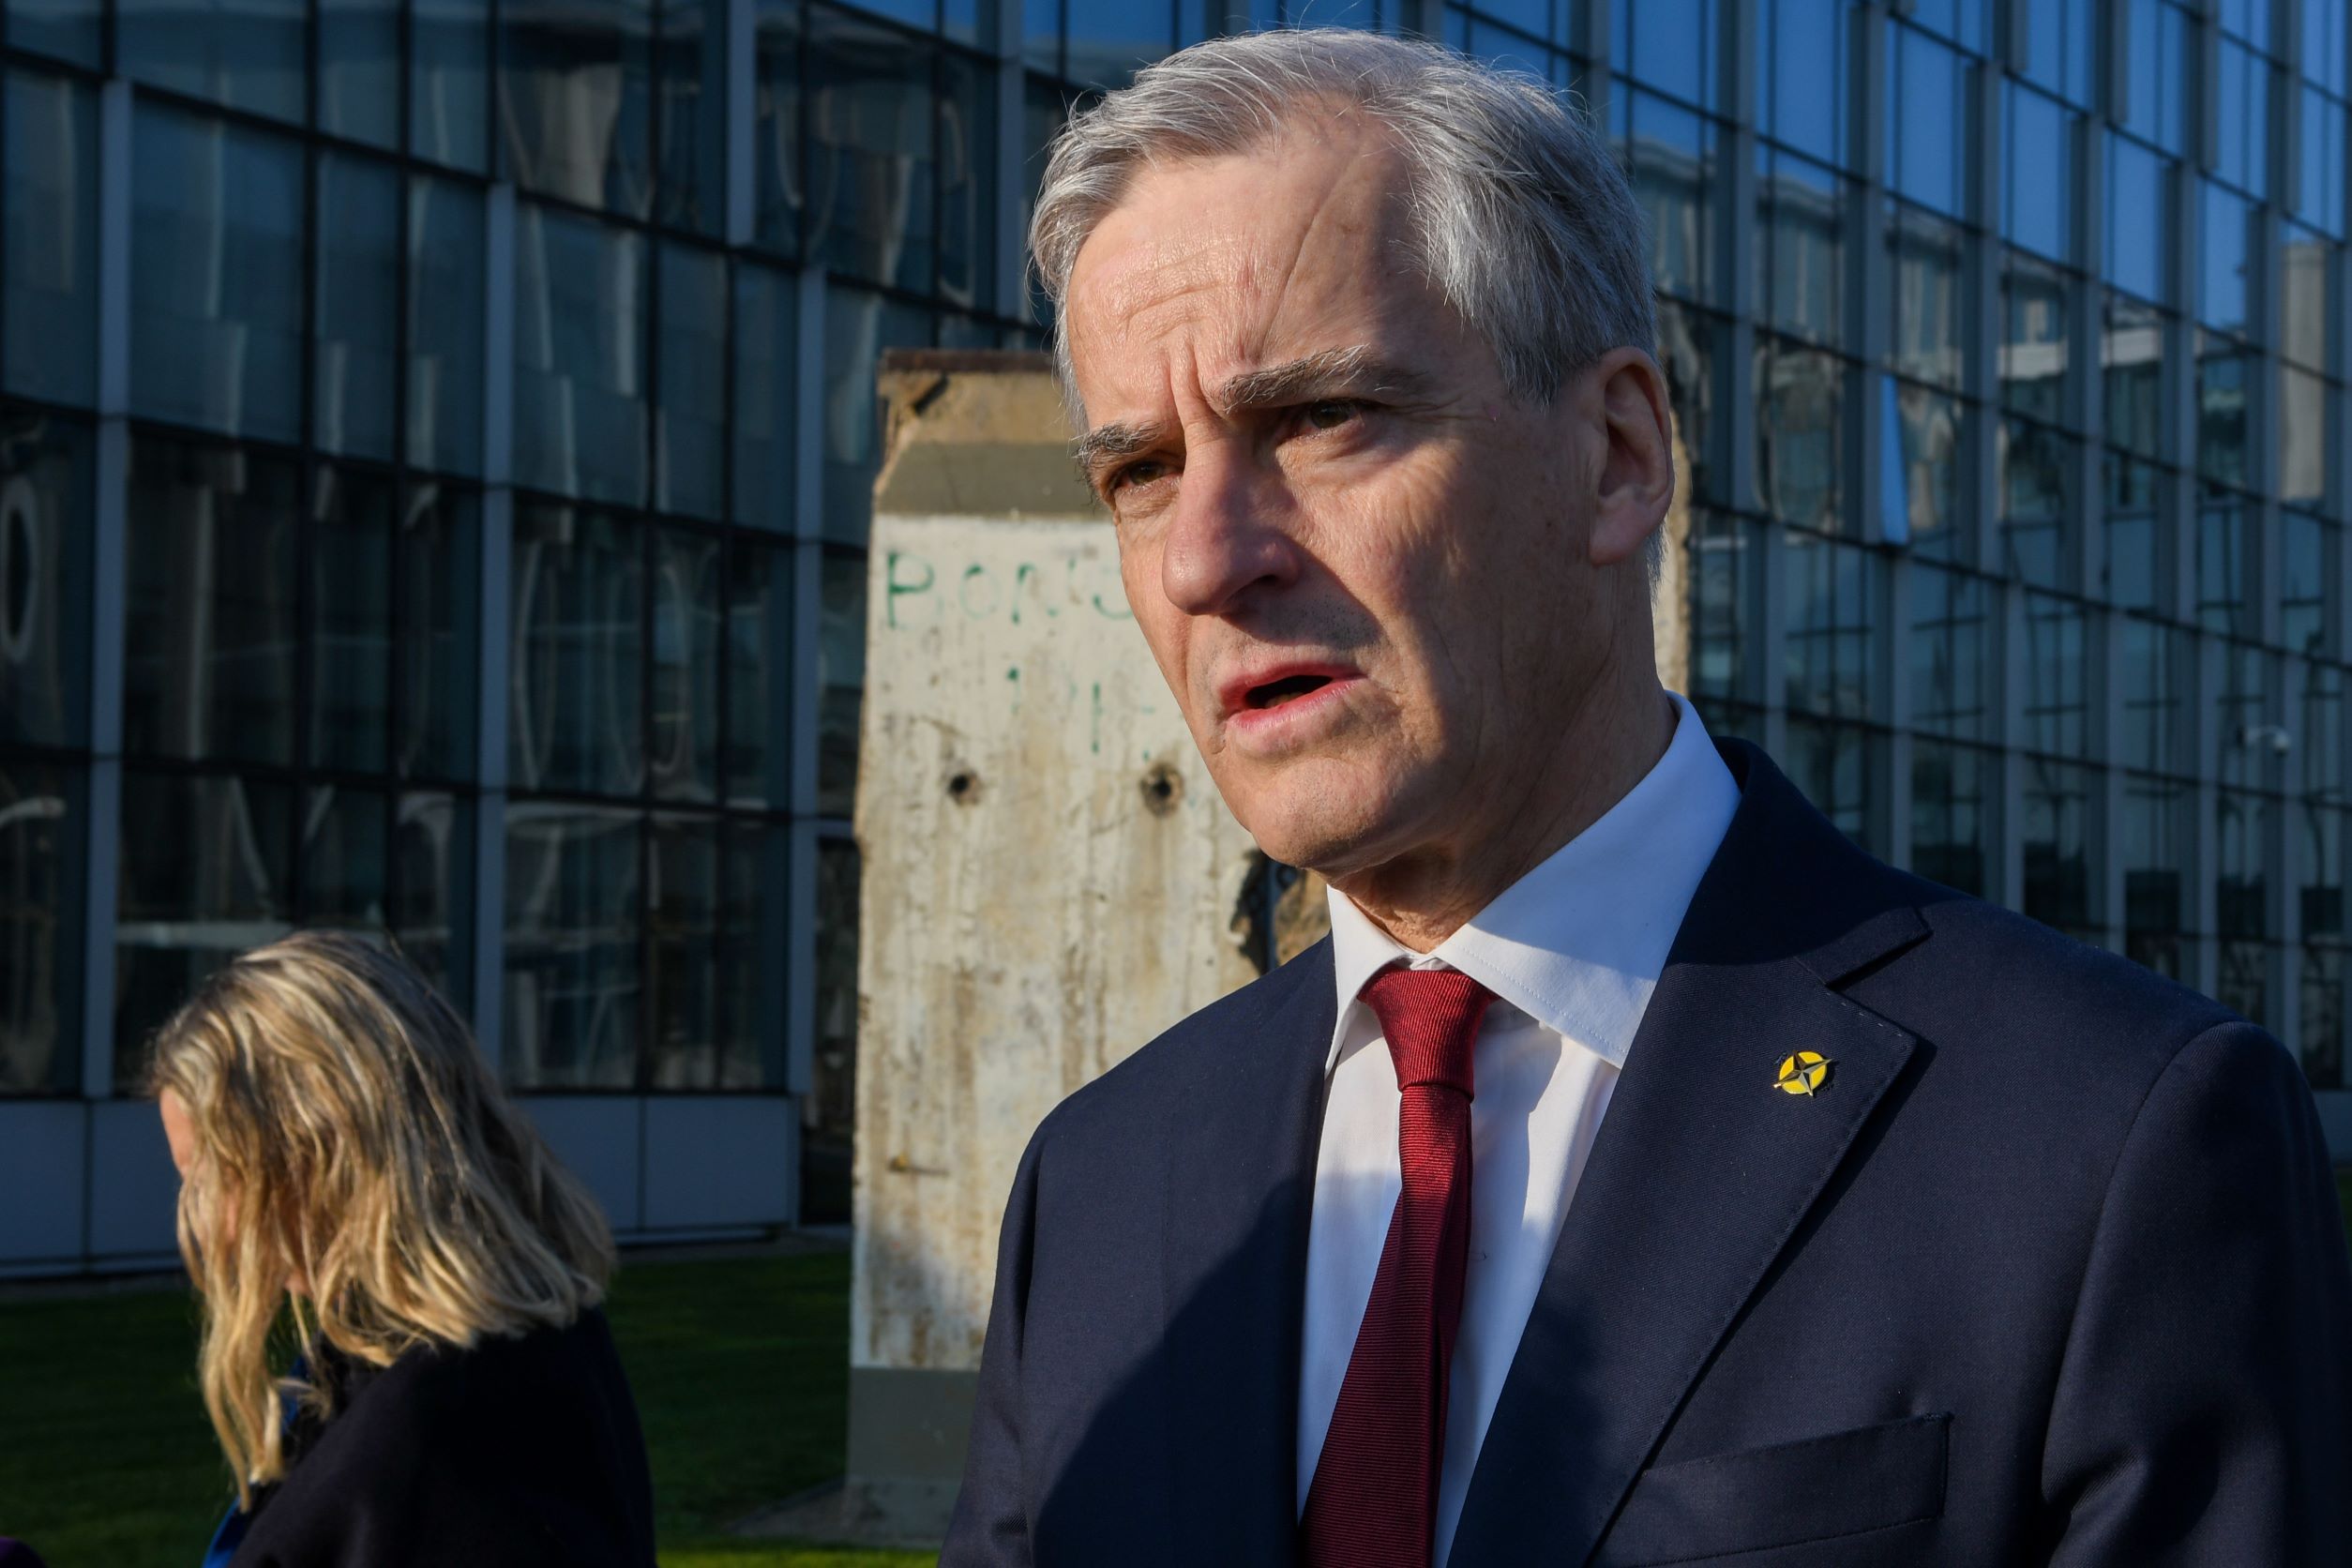 Støre could become head of NATO in 2009: No thanks – Documents